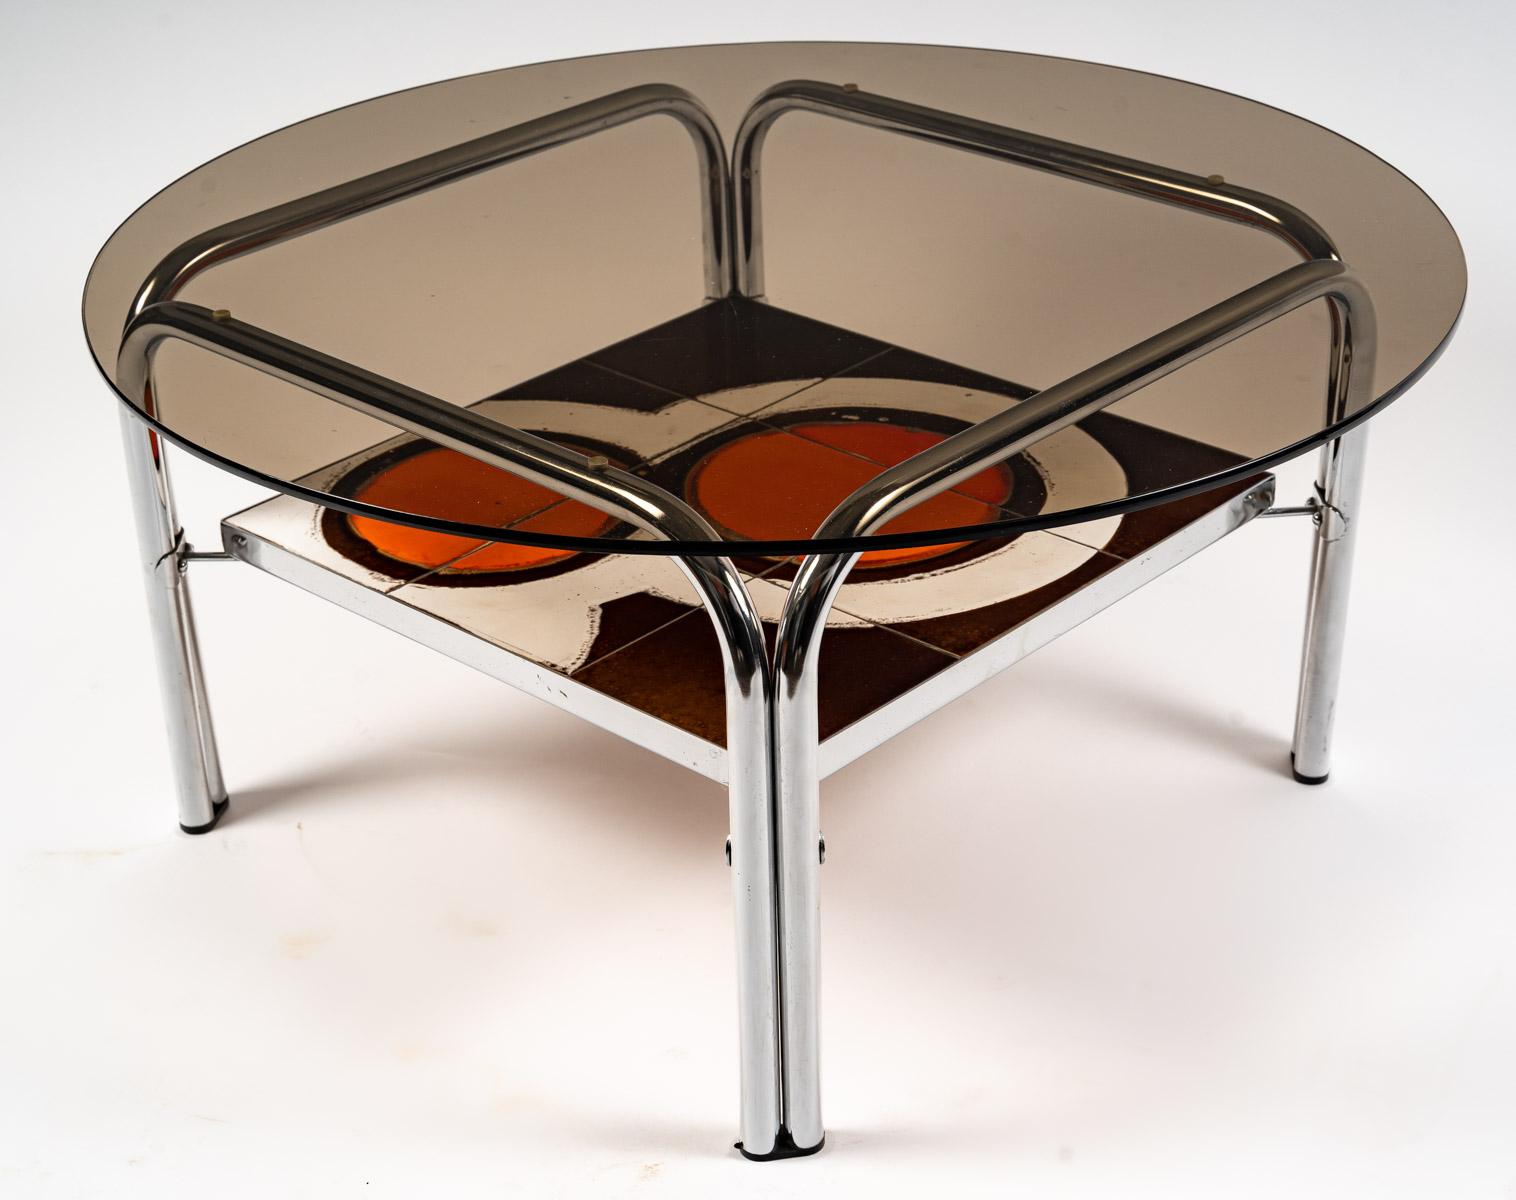 Vintage table, 1970, SPACE AGE DESIGN (influence of atomic science and the space age).
H: 38 cm, W: 79 cm, D: 79 cm
Ref 3148